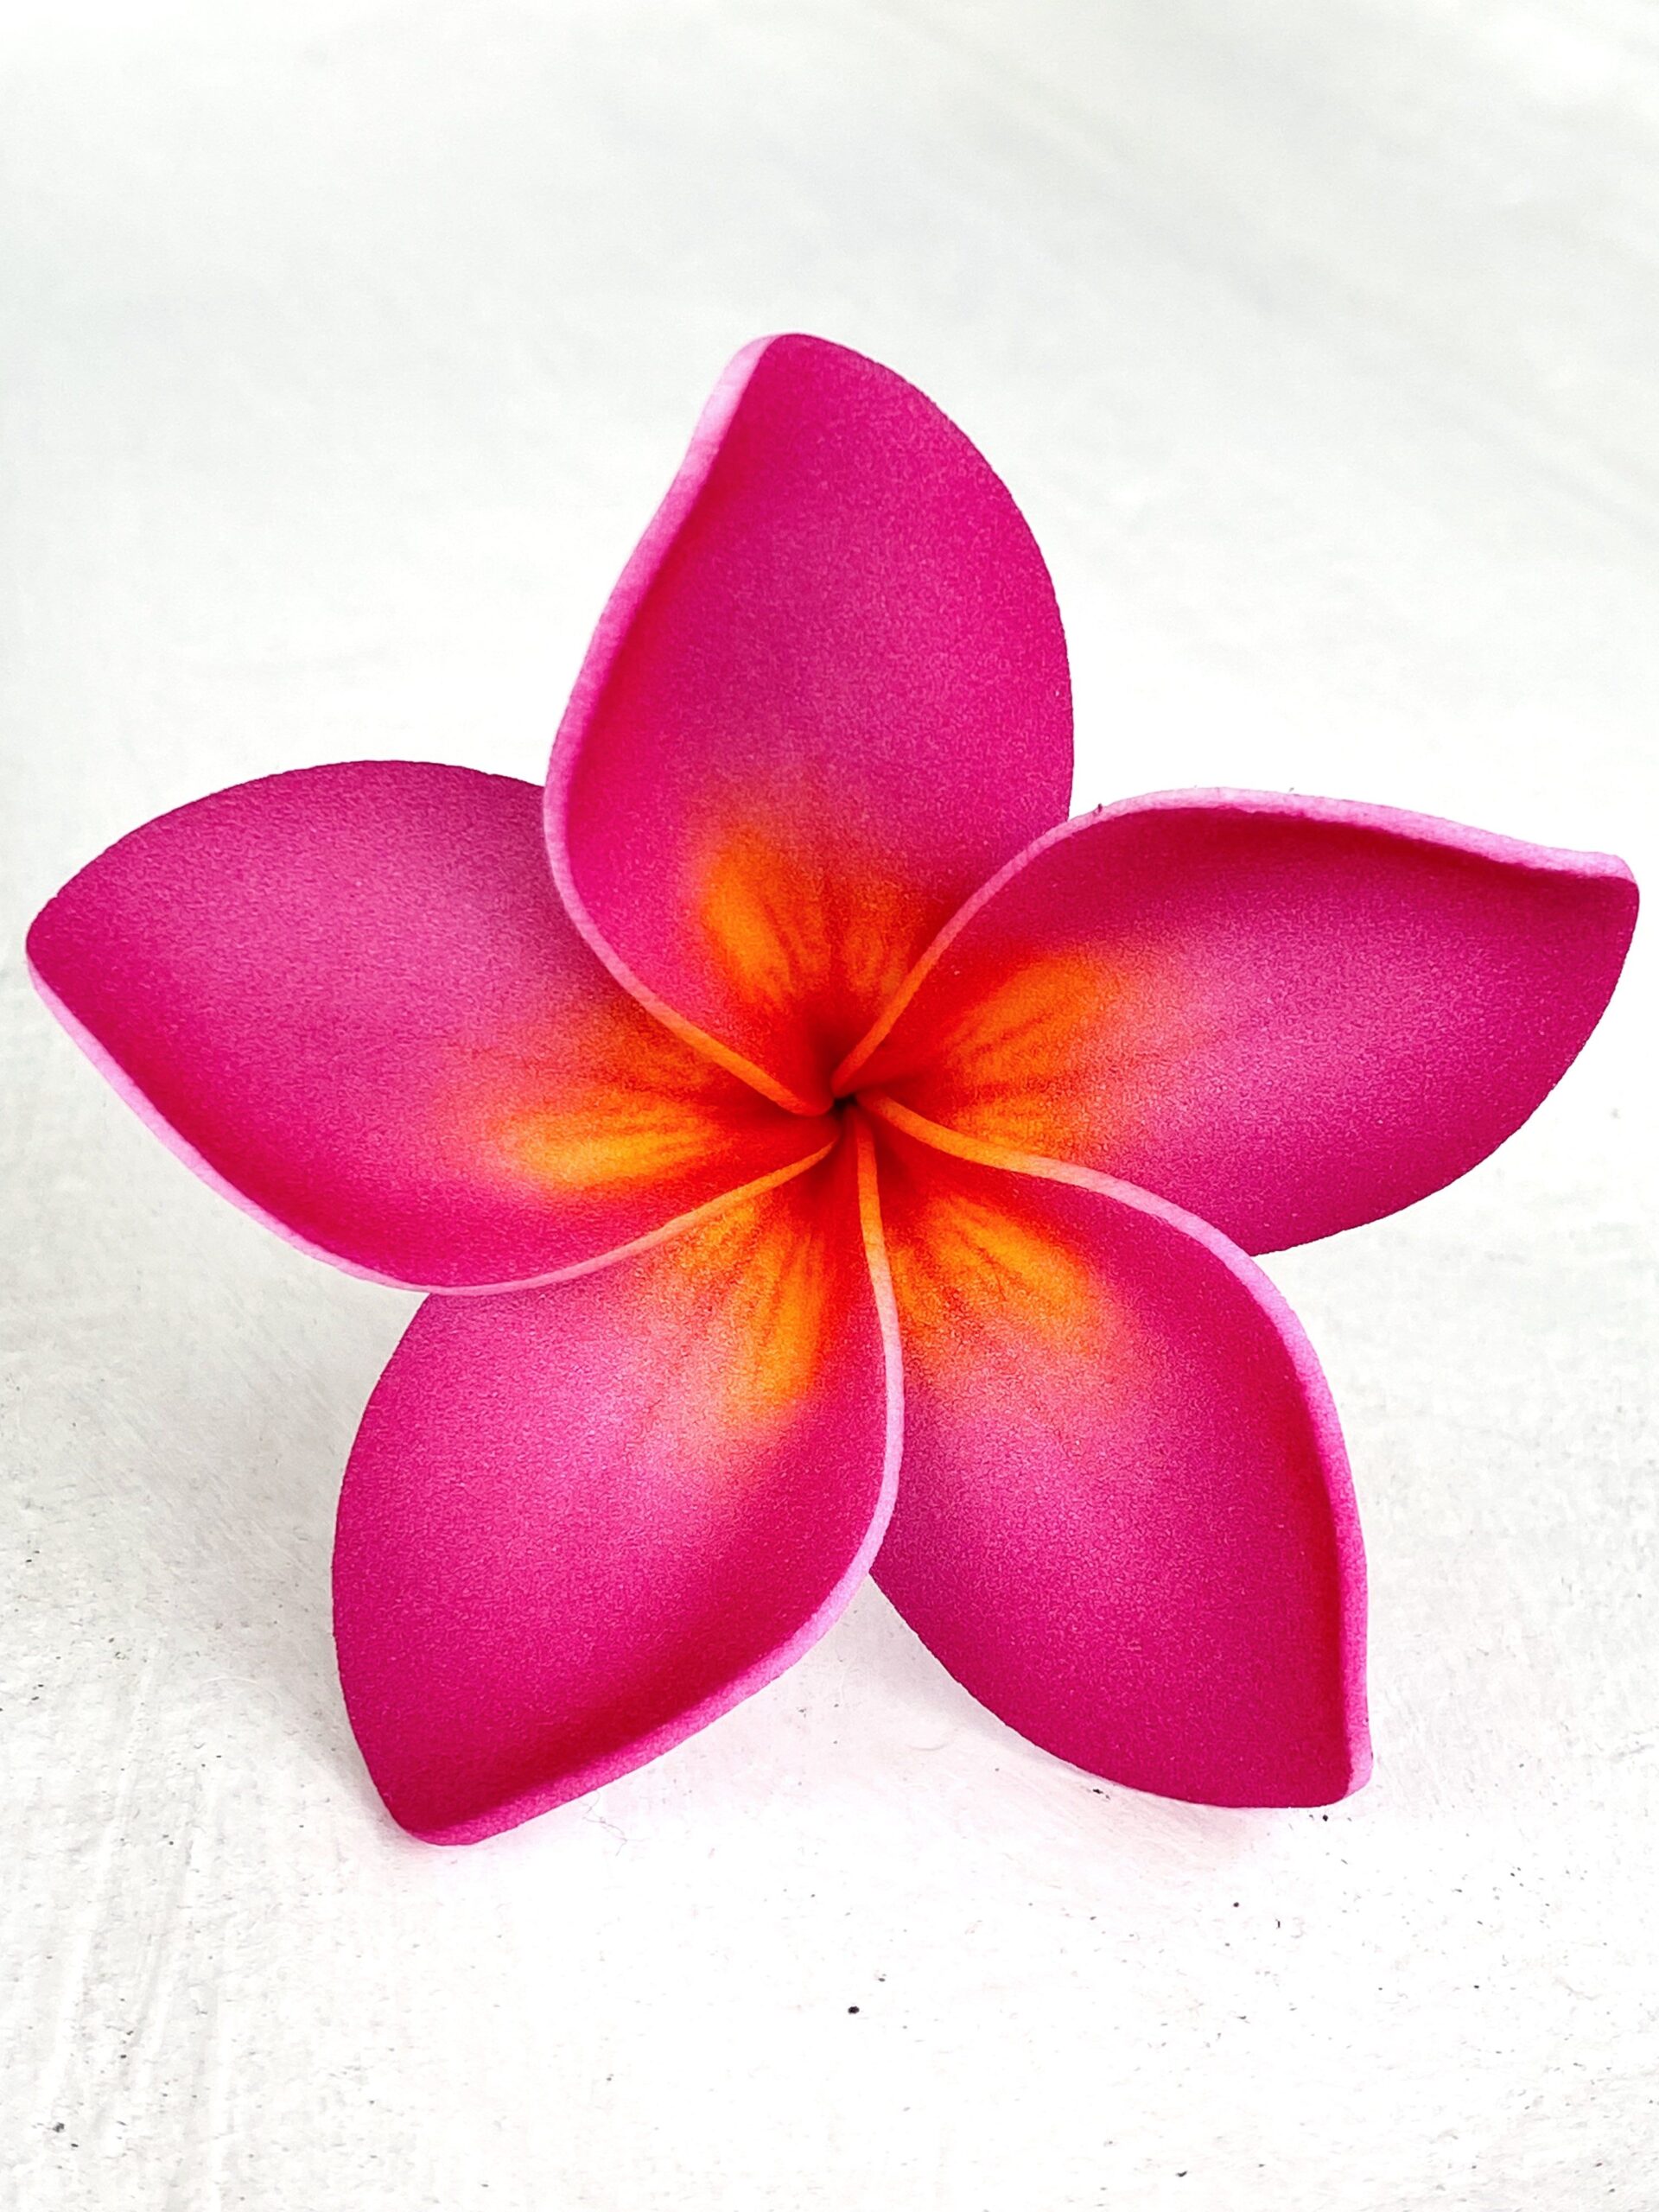 Plumeria Flowers: The Beauty of Tropical Blooms